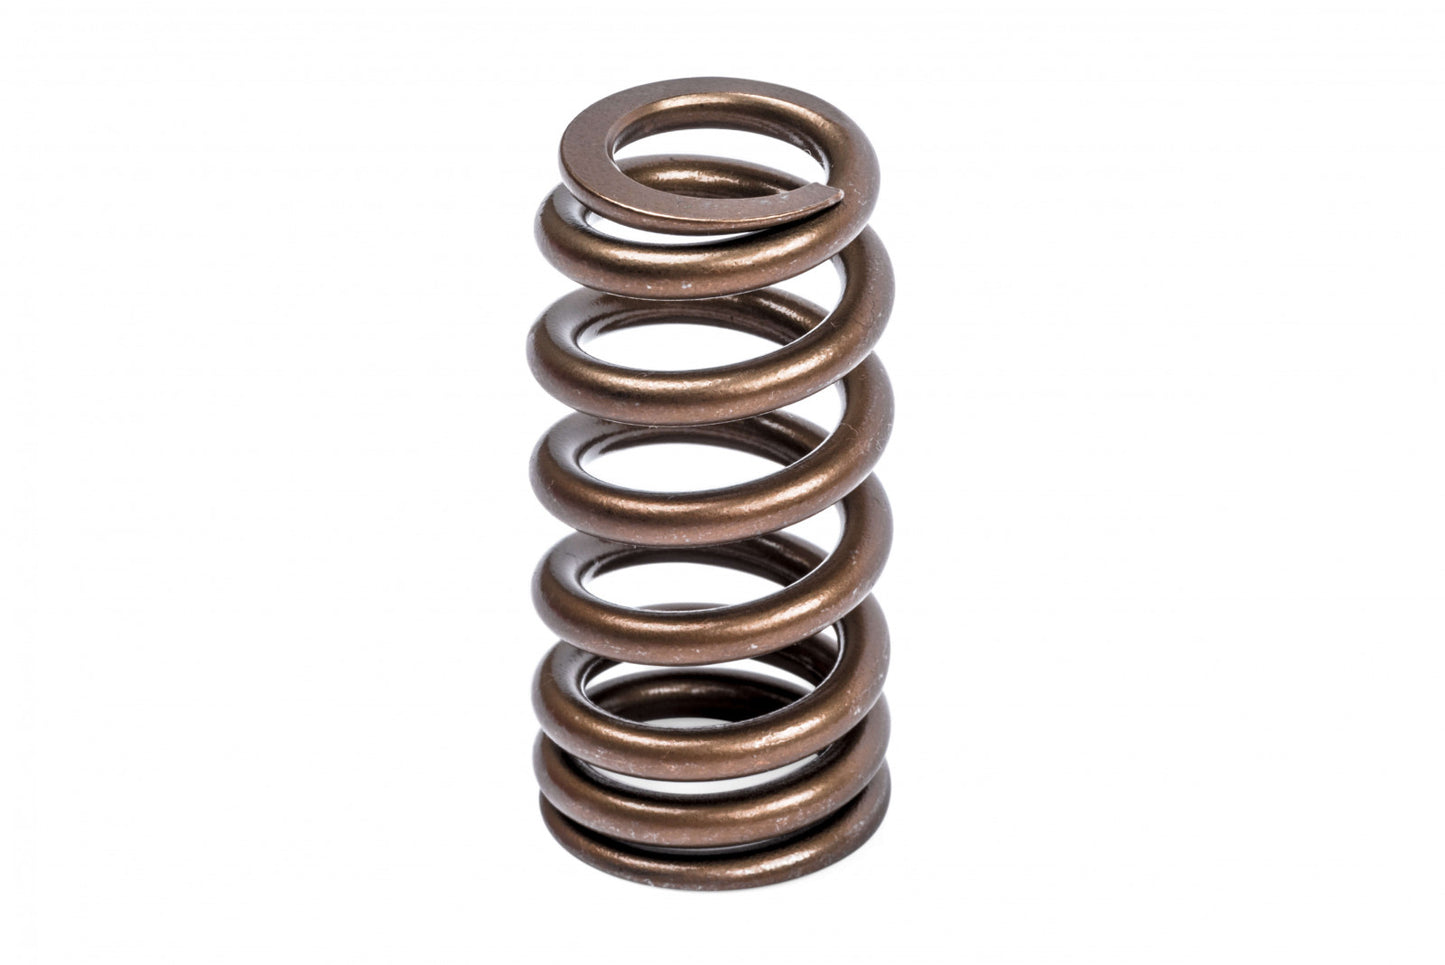 APR Valve Springs/Seats/Retainers - Set of 40 MS100092